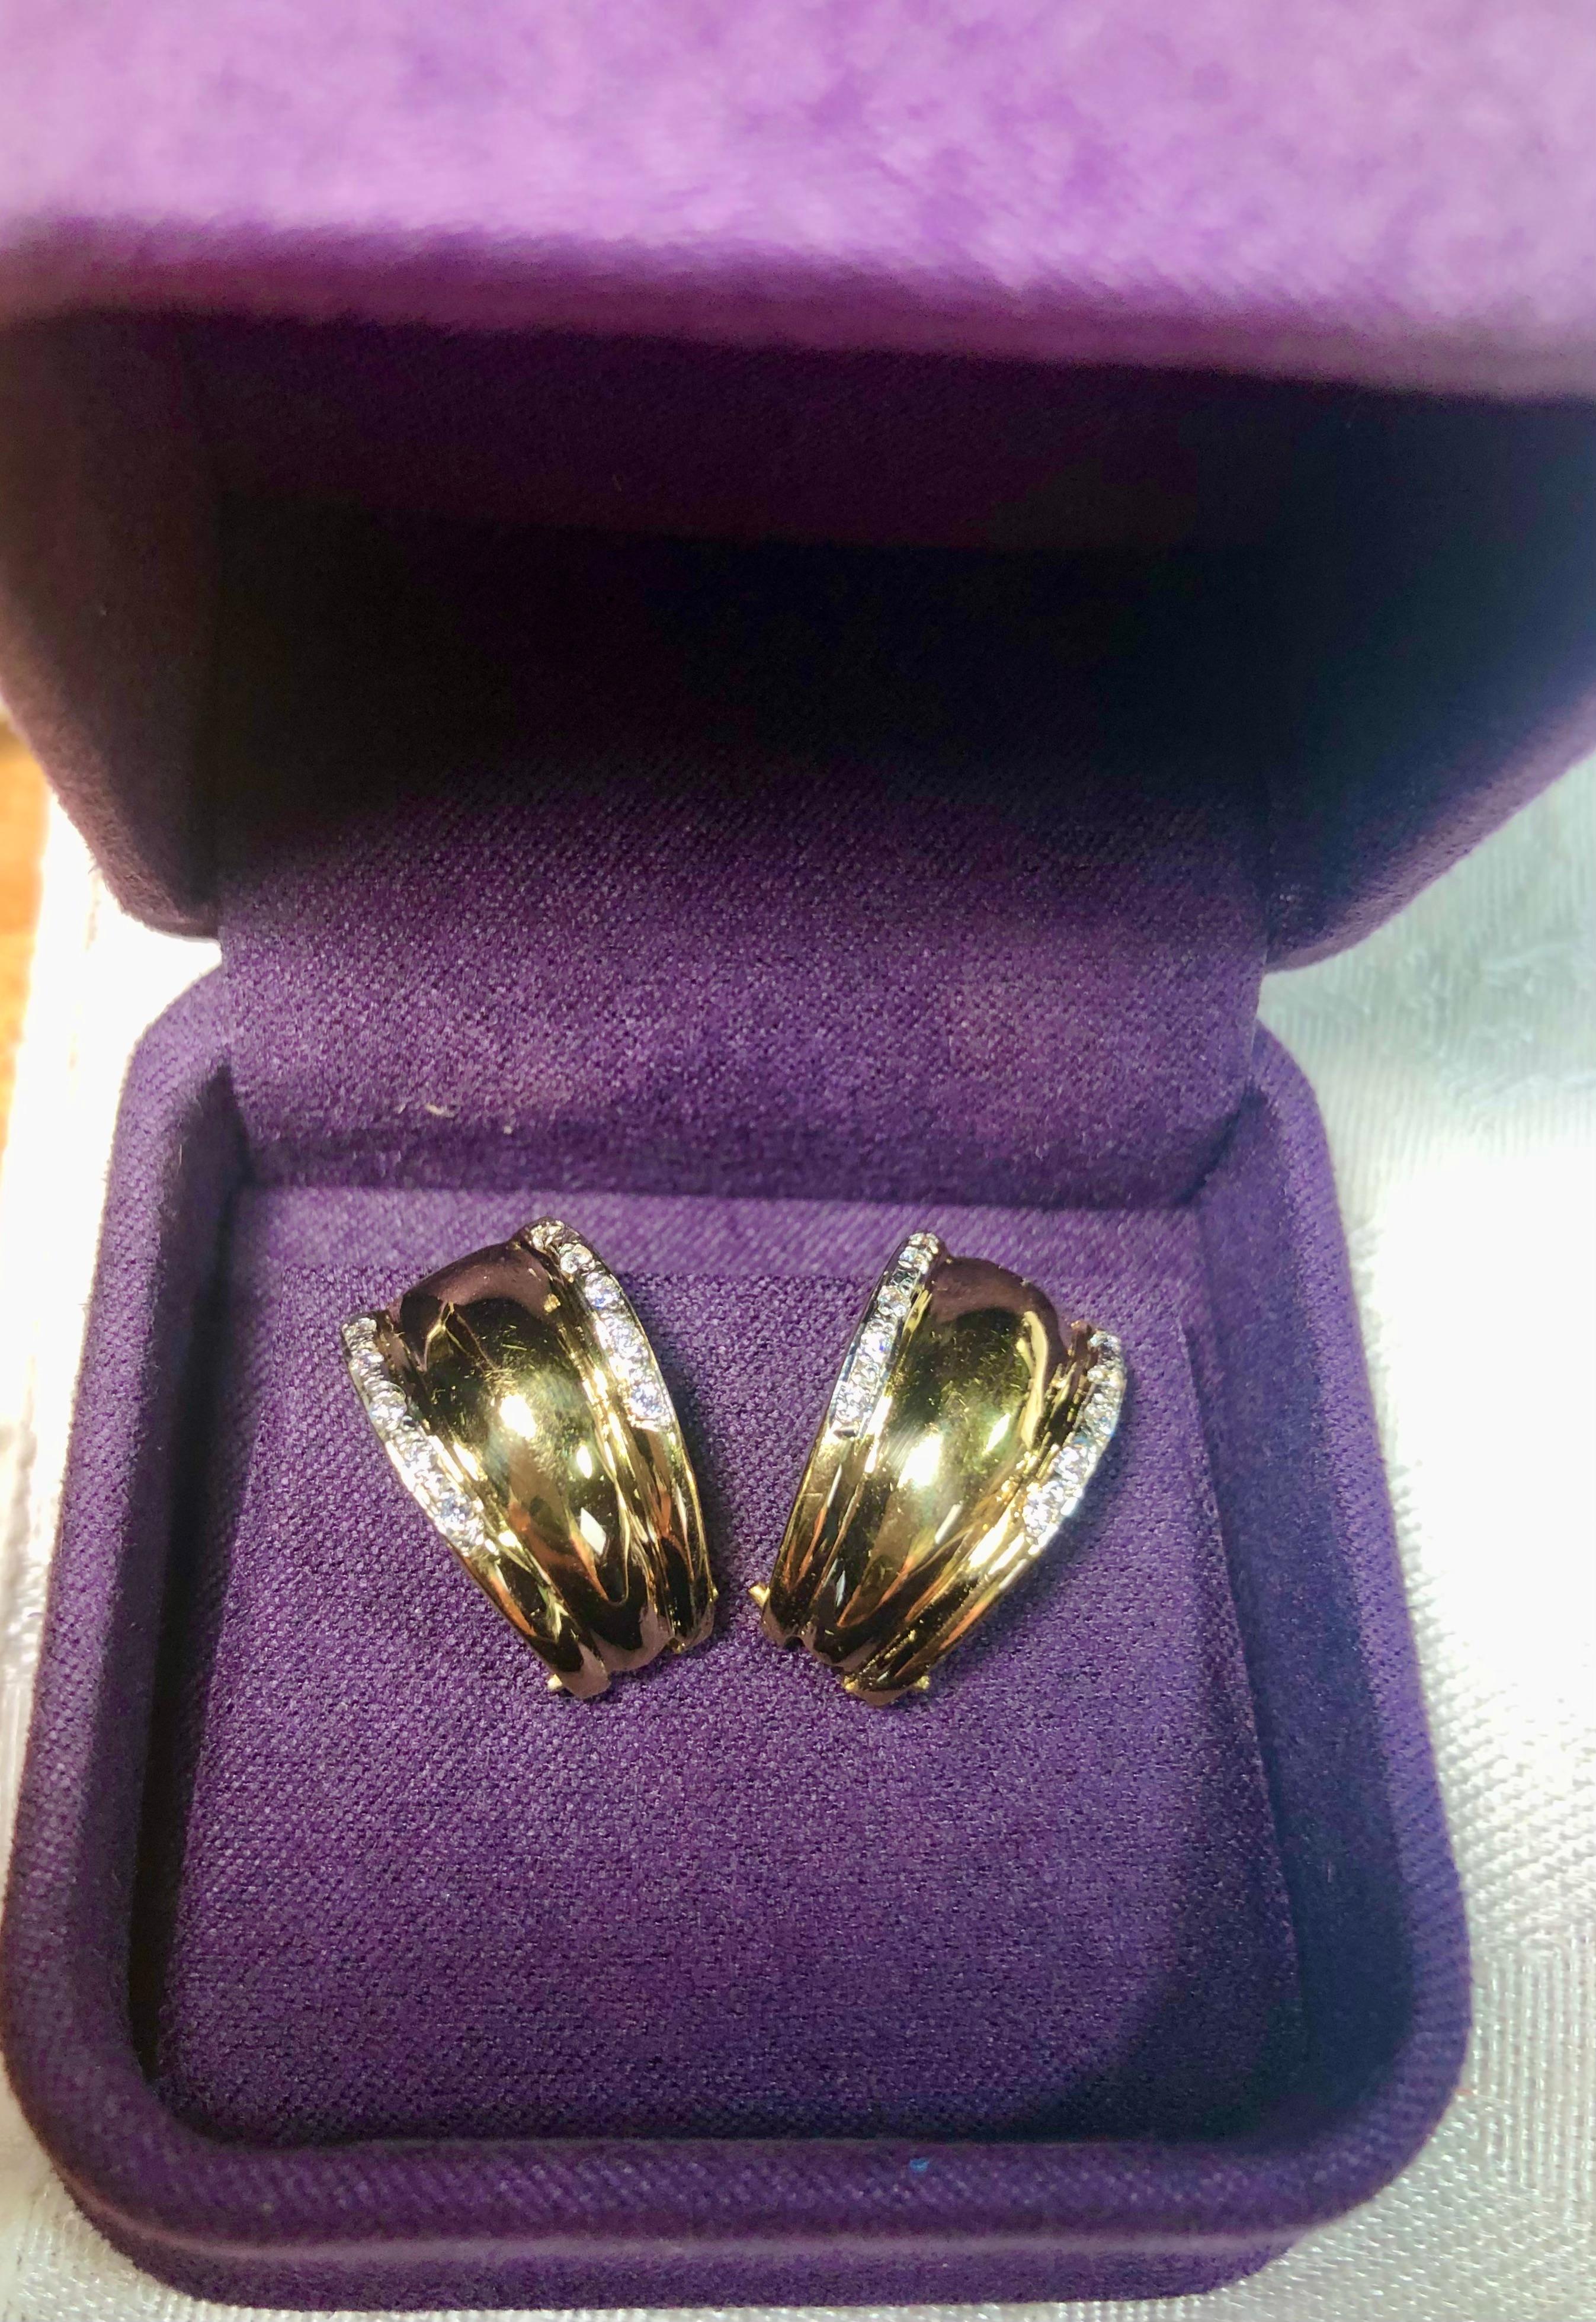 Introducing the timeless elegance of Vintage 18 Yellow Gold  Diamond Clip-on Earrings.
This is a wearable more moderate in size design at 3/4's of an inch in length. accented with 0.20cts diamonds. The high-quality gold is expertly polished to a